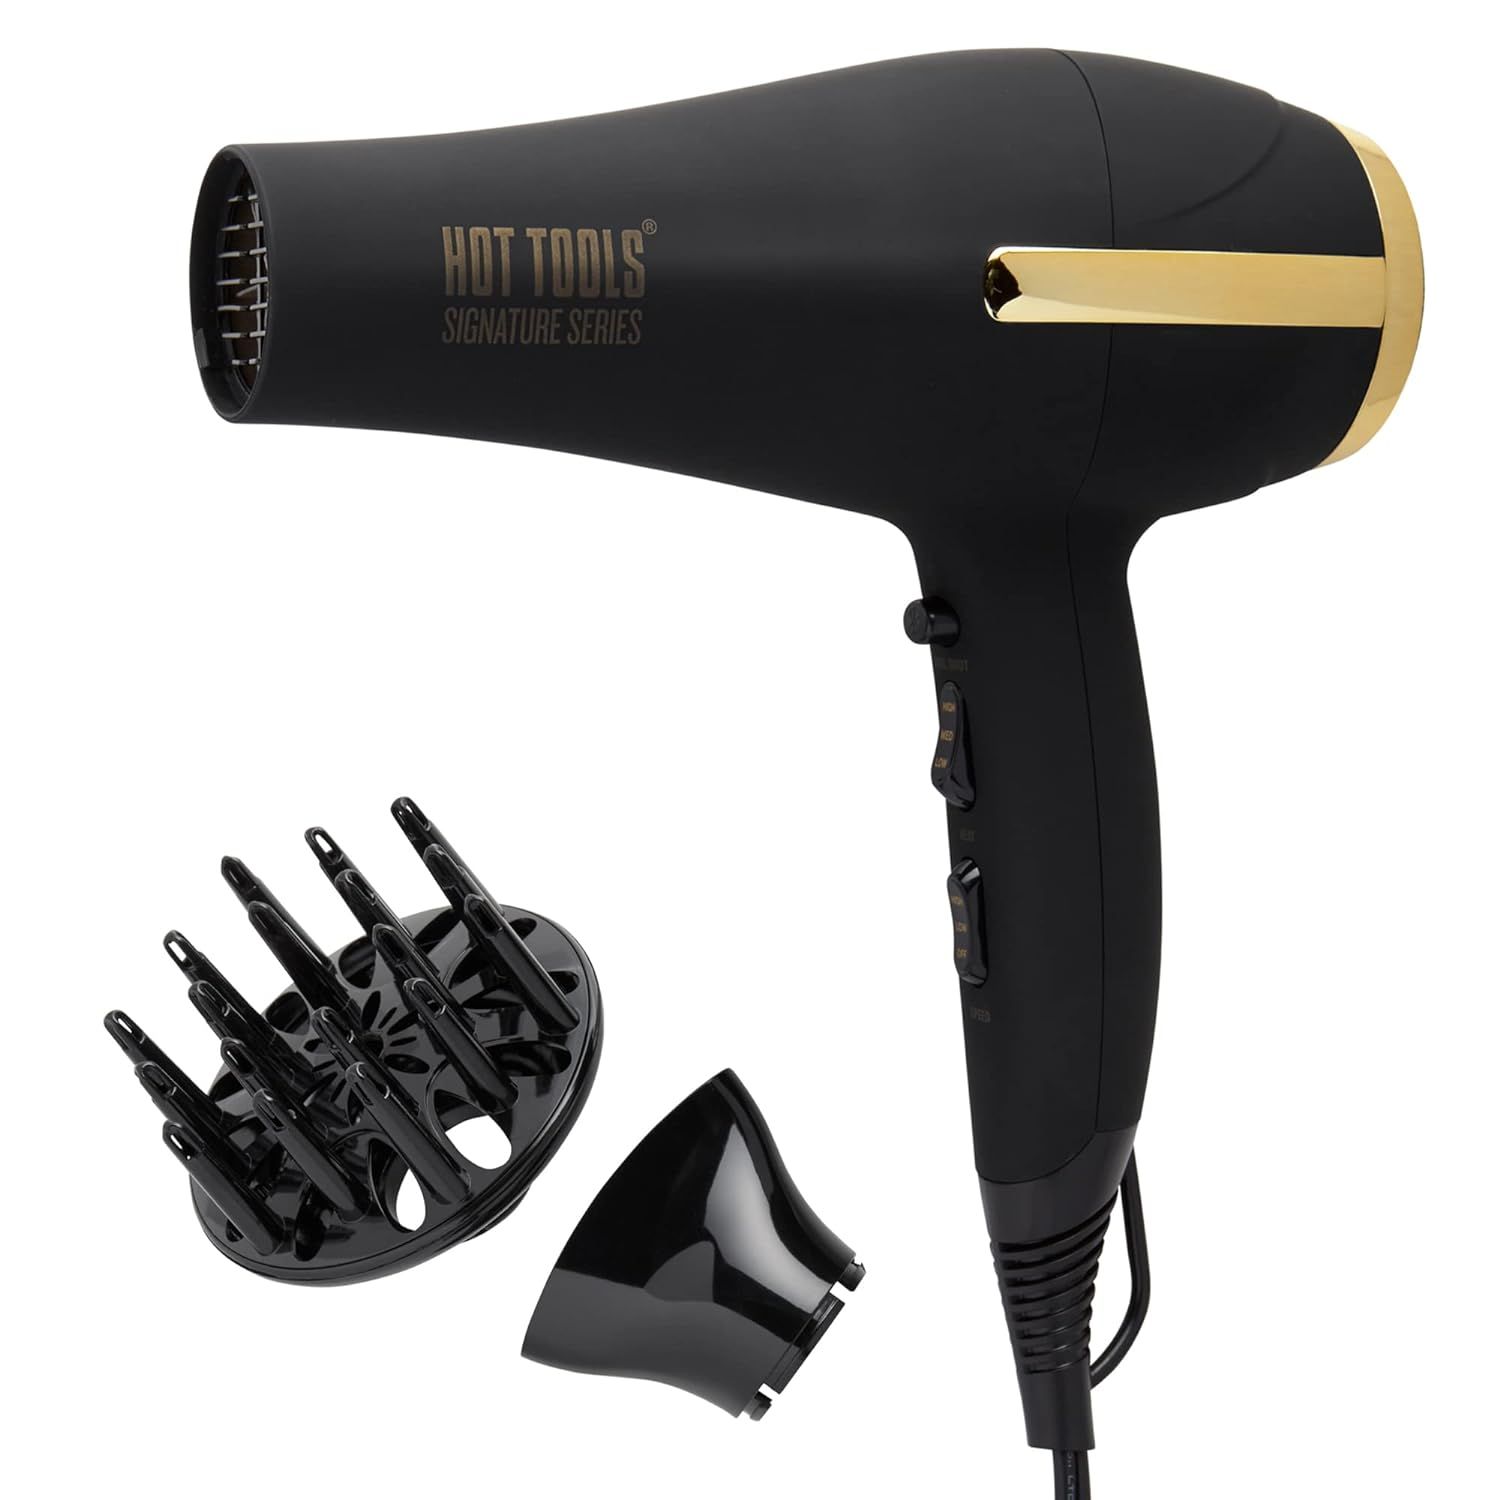 Hot Tools Pro Signature Ionic Ceramic Hair Dryer | Lightweight with Professional Blowout Results | Amazon (US)